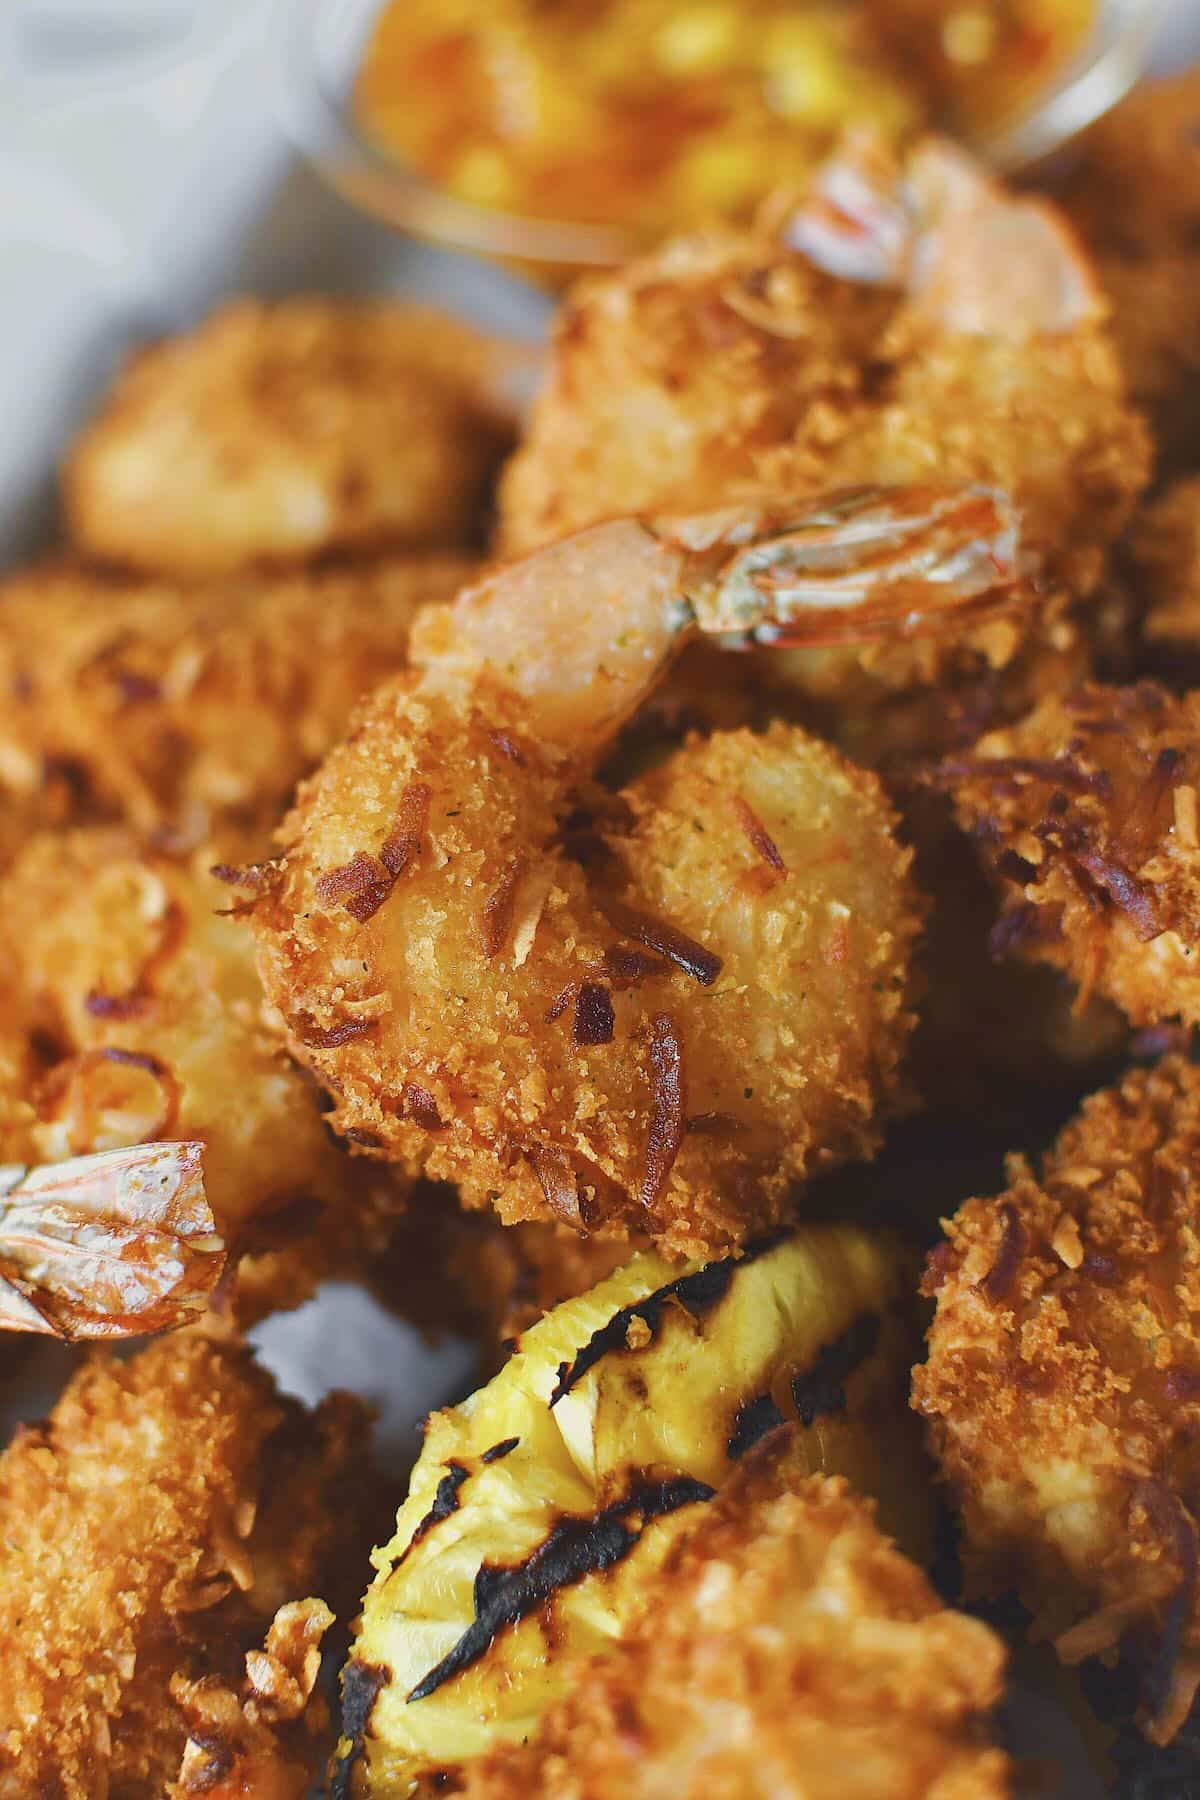 Fried Coconut Shrimp, hot and fresh and cooked to golden brown, ready to eat.